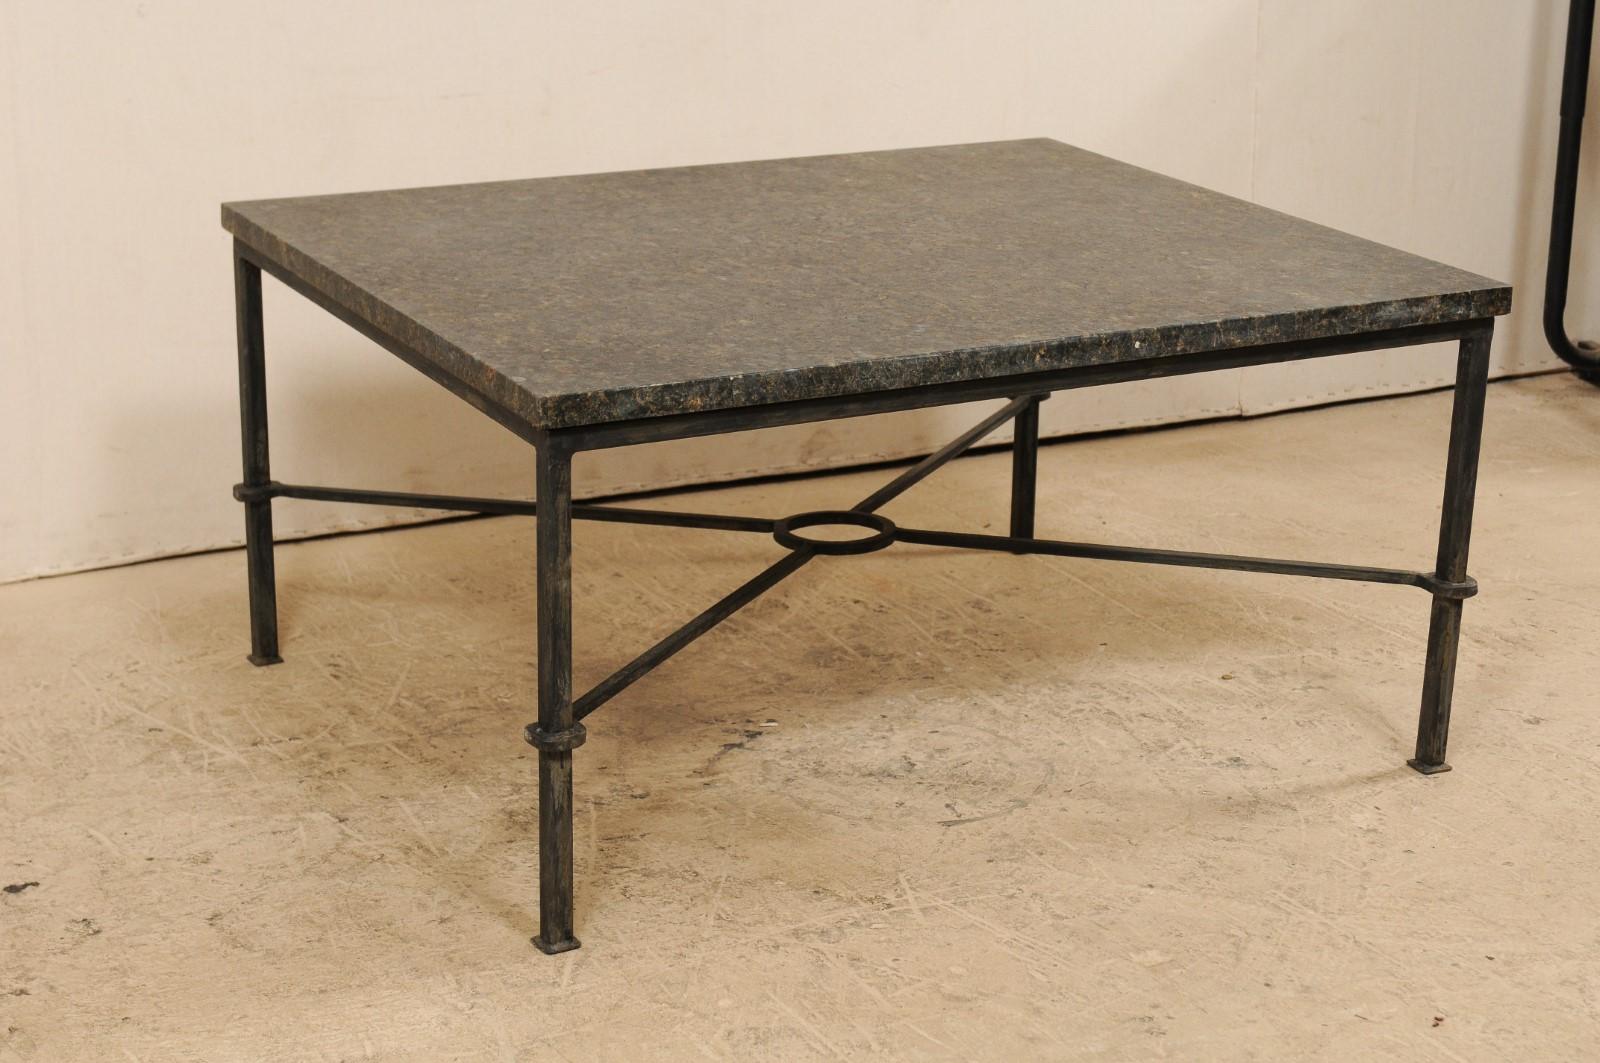 A custom American coffee table with honed granite top. This modern designed coffee table features a honed granite top raised upon a black iron base comprised of four straight legs, which are supported by an x-style stretcher with an o-shaped ring at